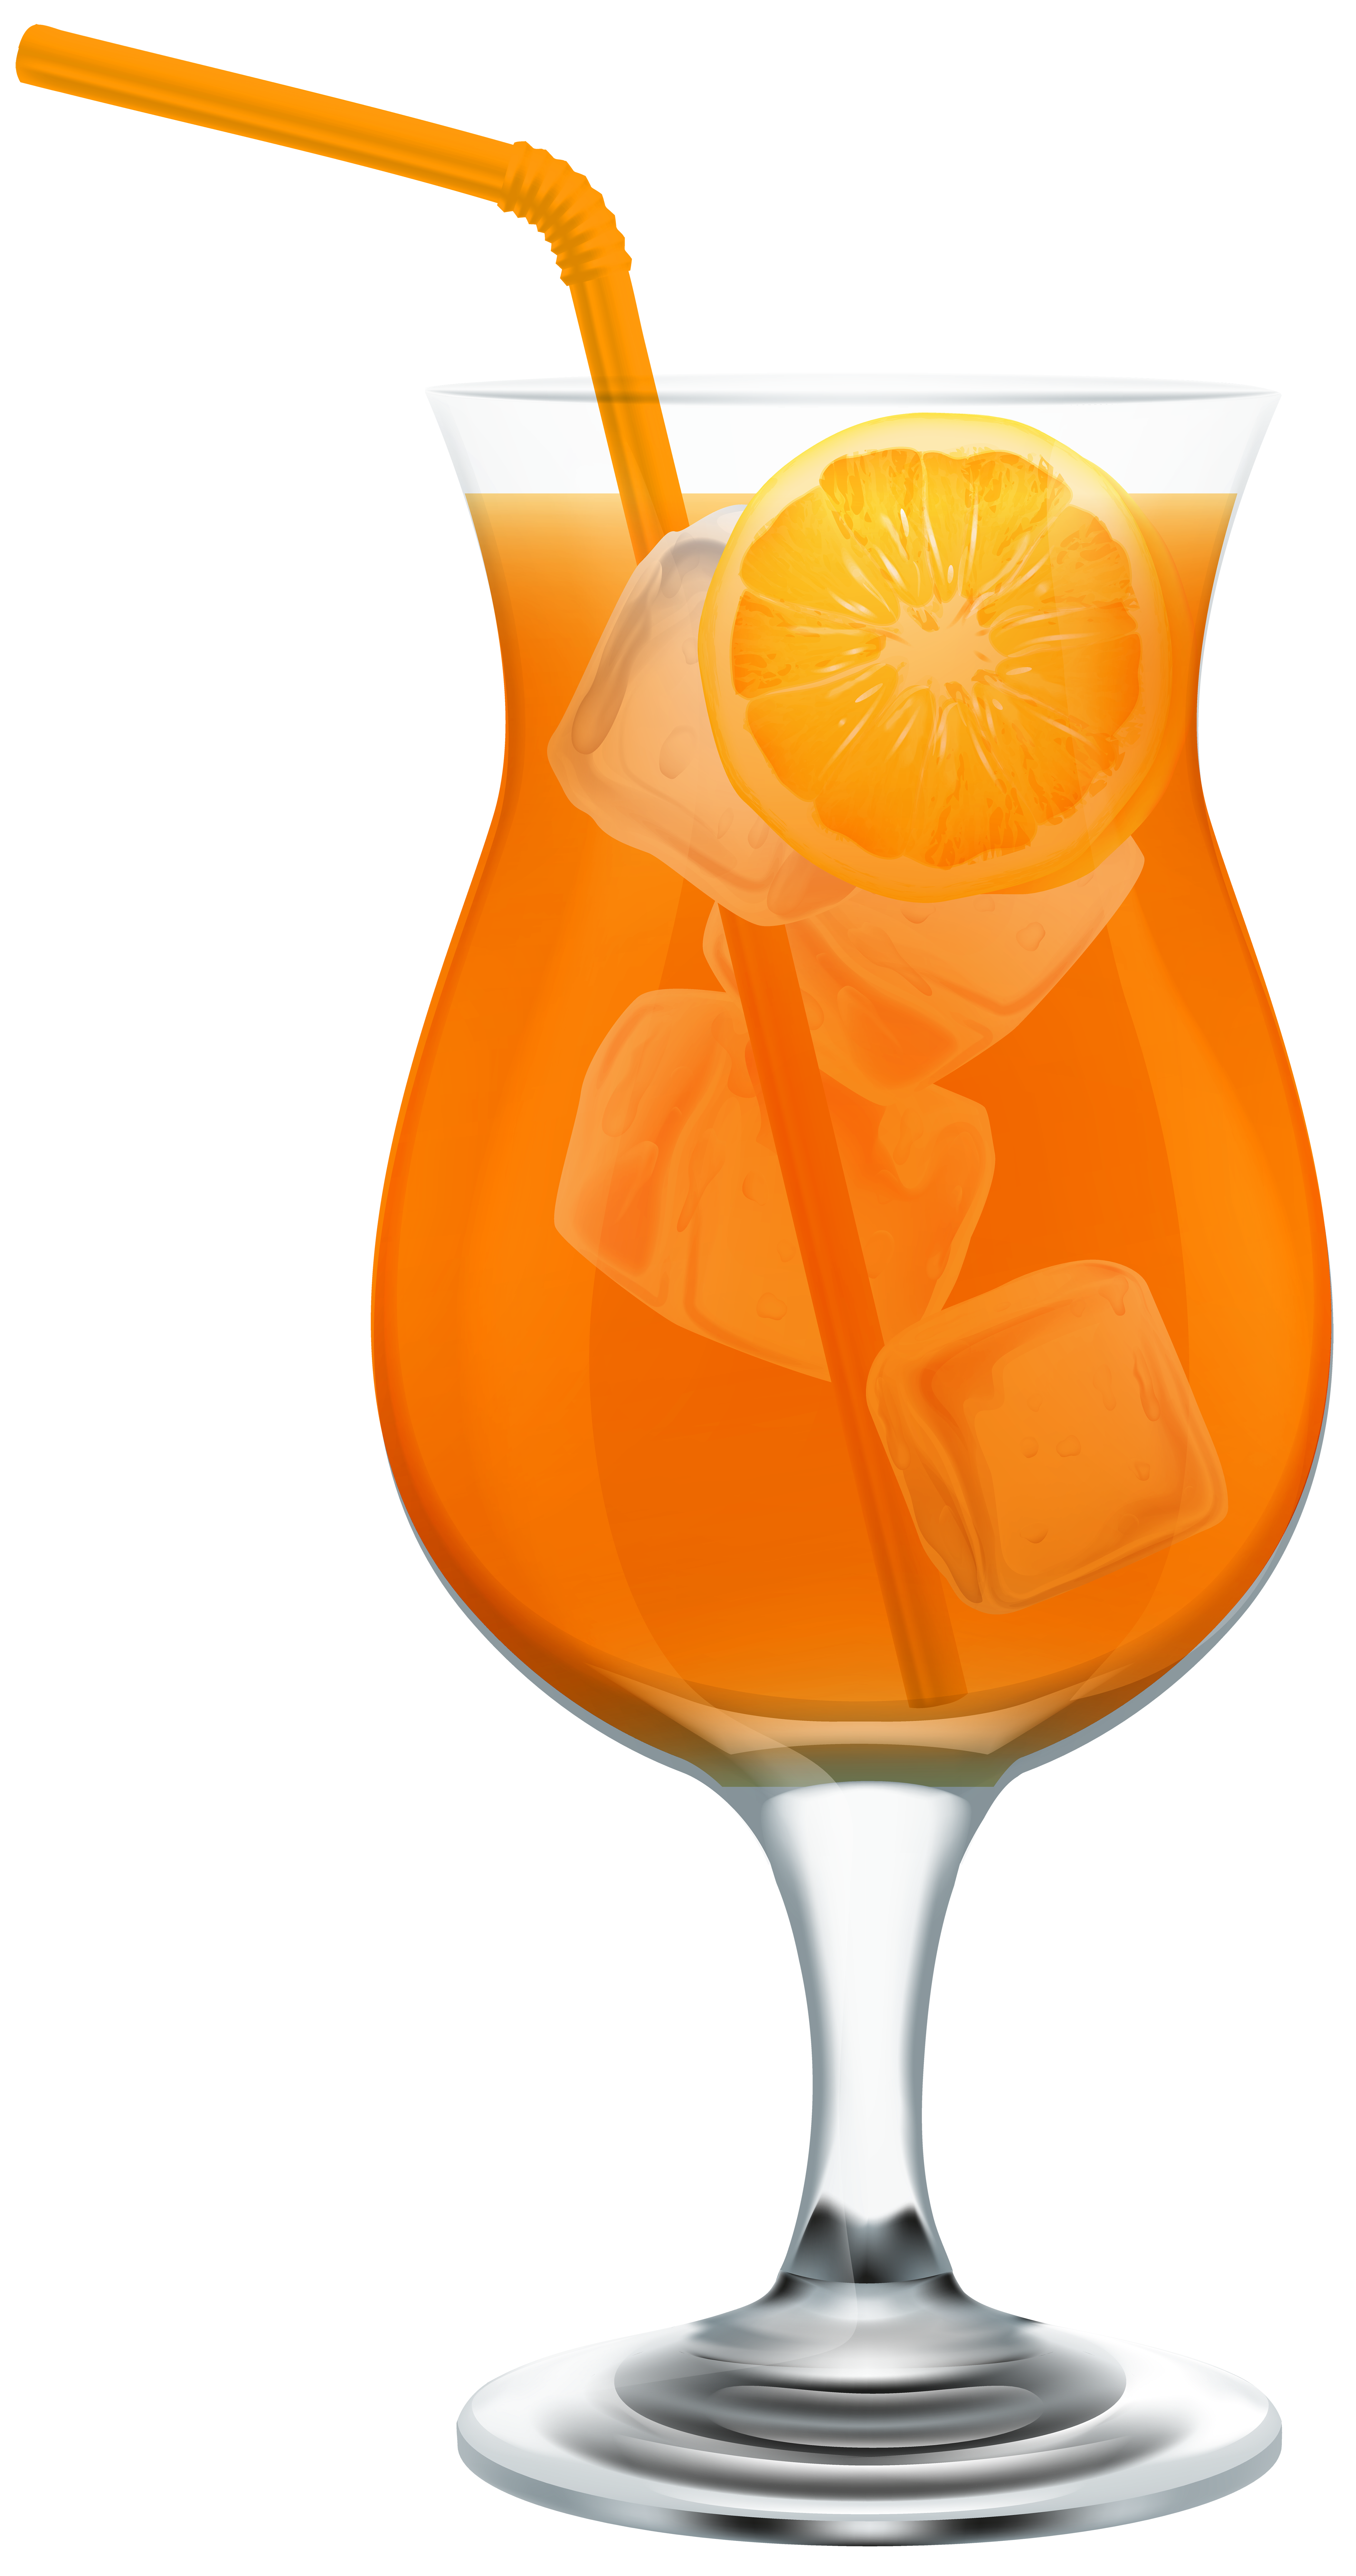 Orange Juice Cocktail Png Clip Art Image Gallery Yopriceville High Quality Images And Transparent Png Free Clipart